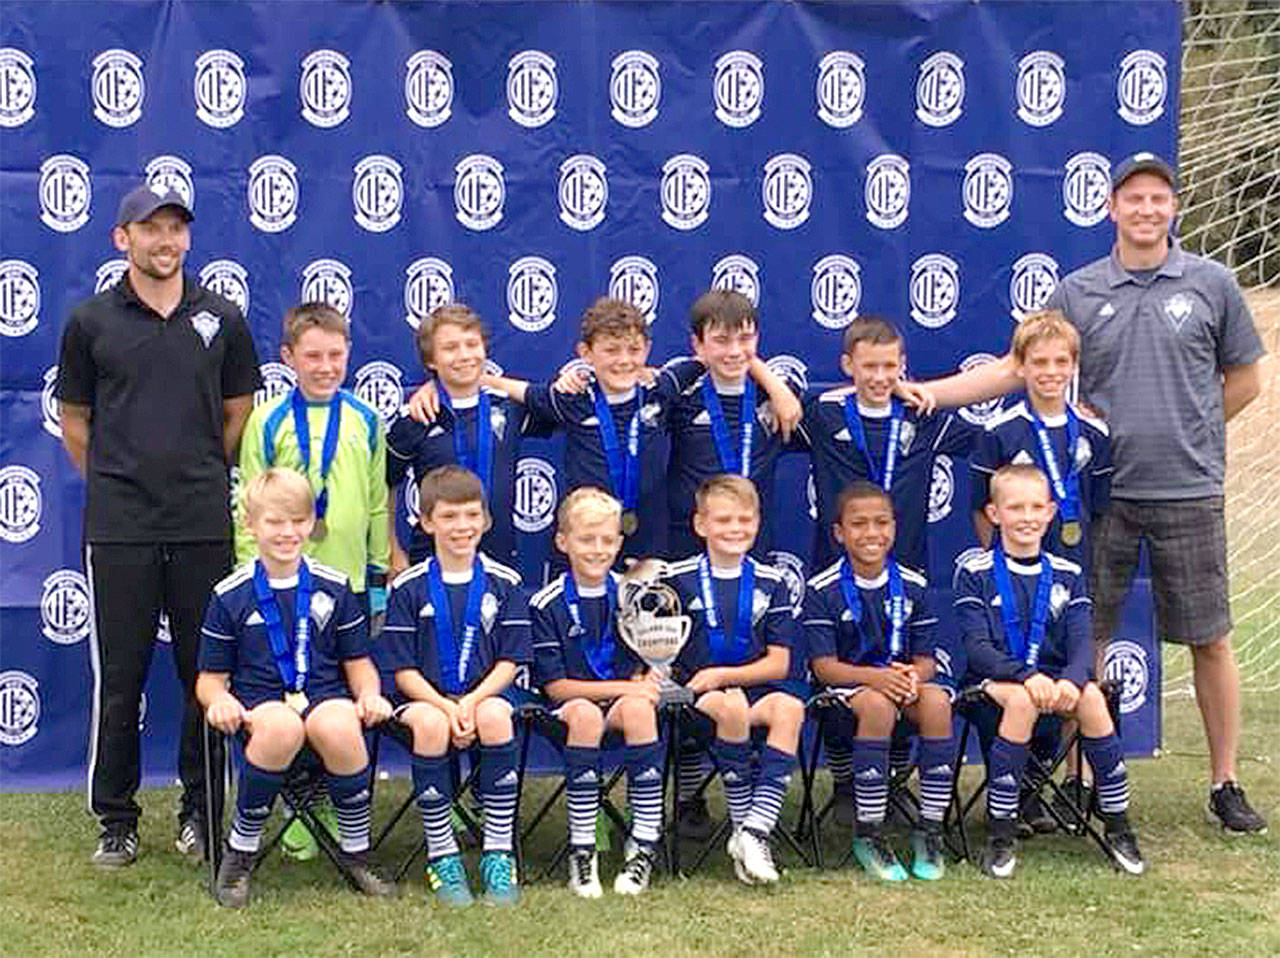 The Storm King U11 soccer team won its division at the Bainbridge Island Cup last weekend. The team is from left, back row, coach Kyle Kautzman, goalkeeper Kaiden Tosland, Ian Smithson, Brennin Tuff, Colin Feik, Colton Wagner, Bjorn Henrikson and coach Kris Henrikson. From left, front row, are Collin Welch, Carston Seibel, Ben Greatwood, Aaiden Galvin, Myles Taylor and Rene Martin.